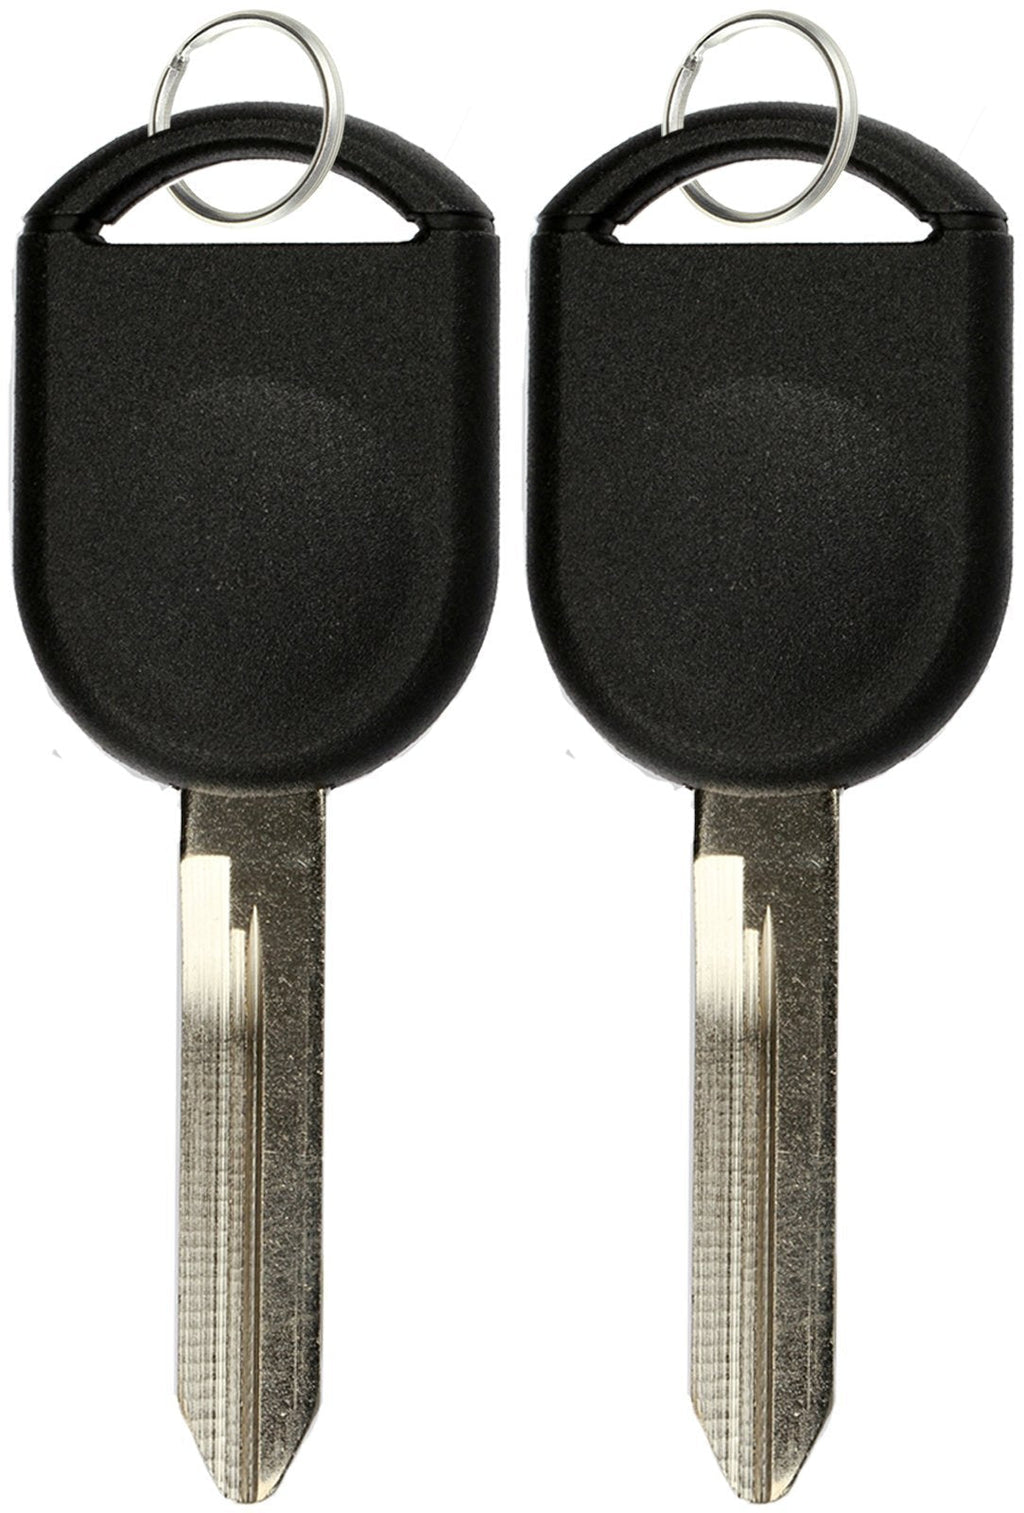  [AUSTRALIA] - KeylessOption Replacement Uncut Ignition Chipped Car Key Transponder Blank For Ford Lincoln Mercury Mazda (Pack of 2)